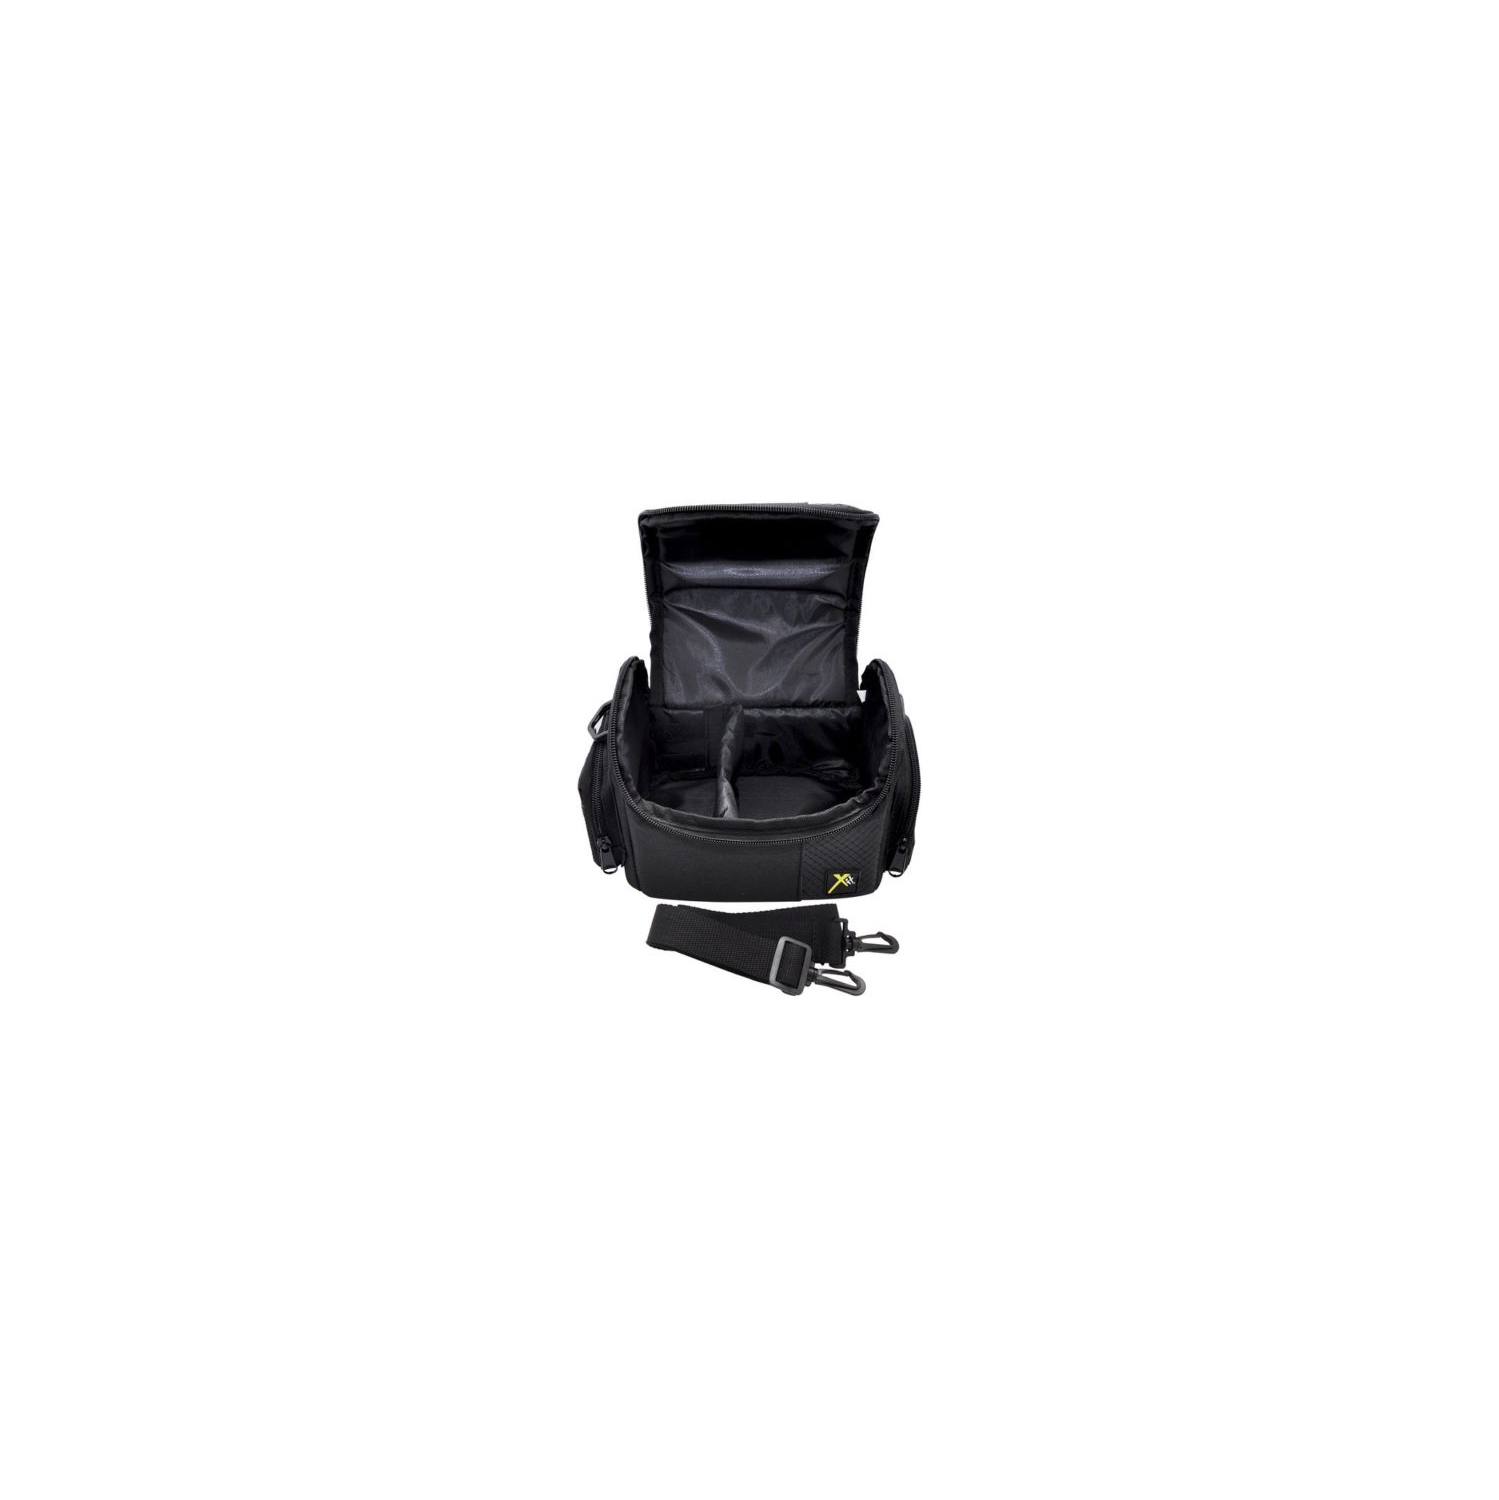 Digital Deluxe Camera Carrying Case Bag For Olympus TG-5 E-PL9 E-M10 lll E-PL8